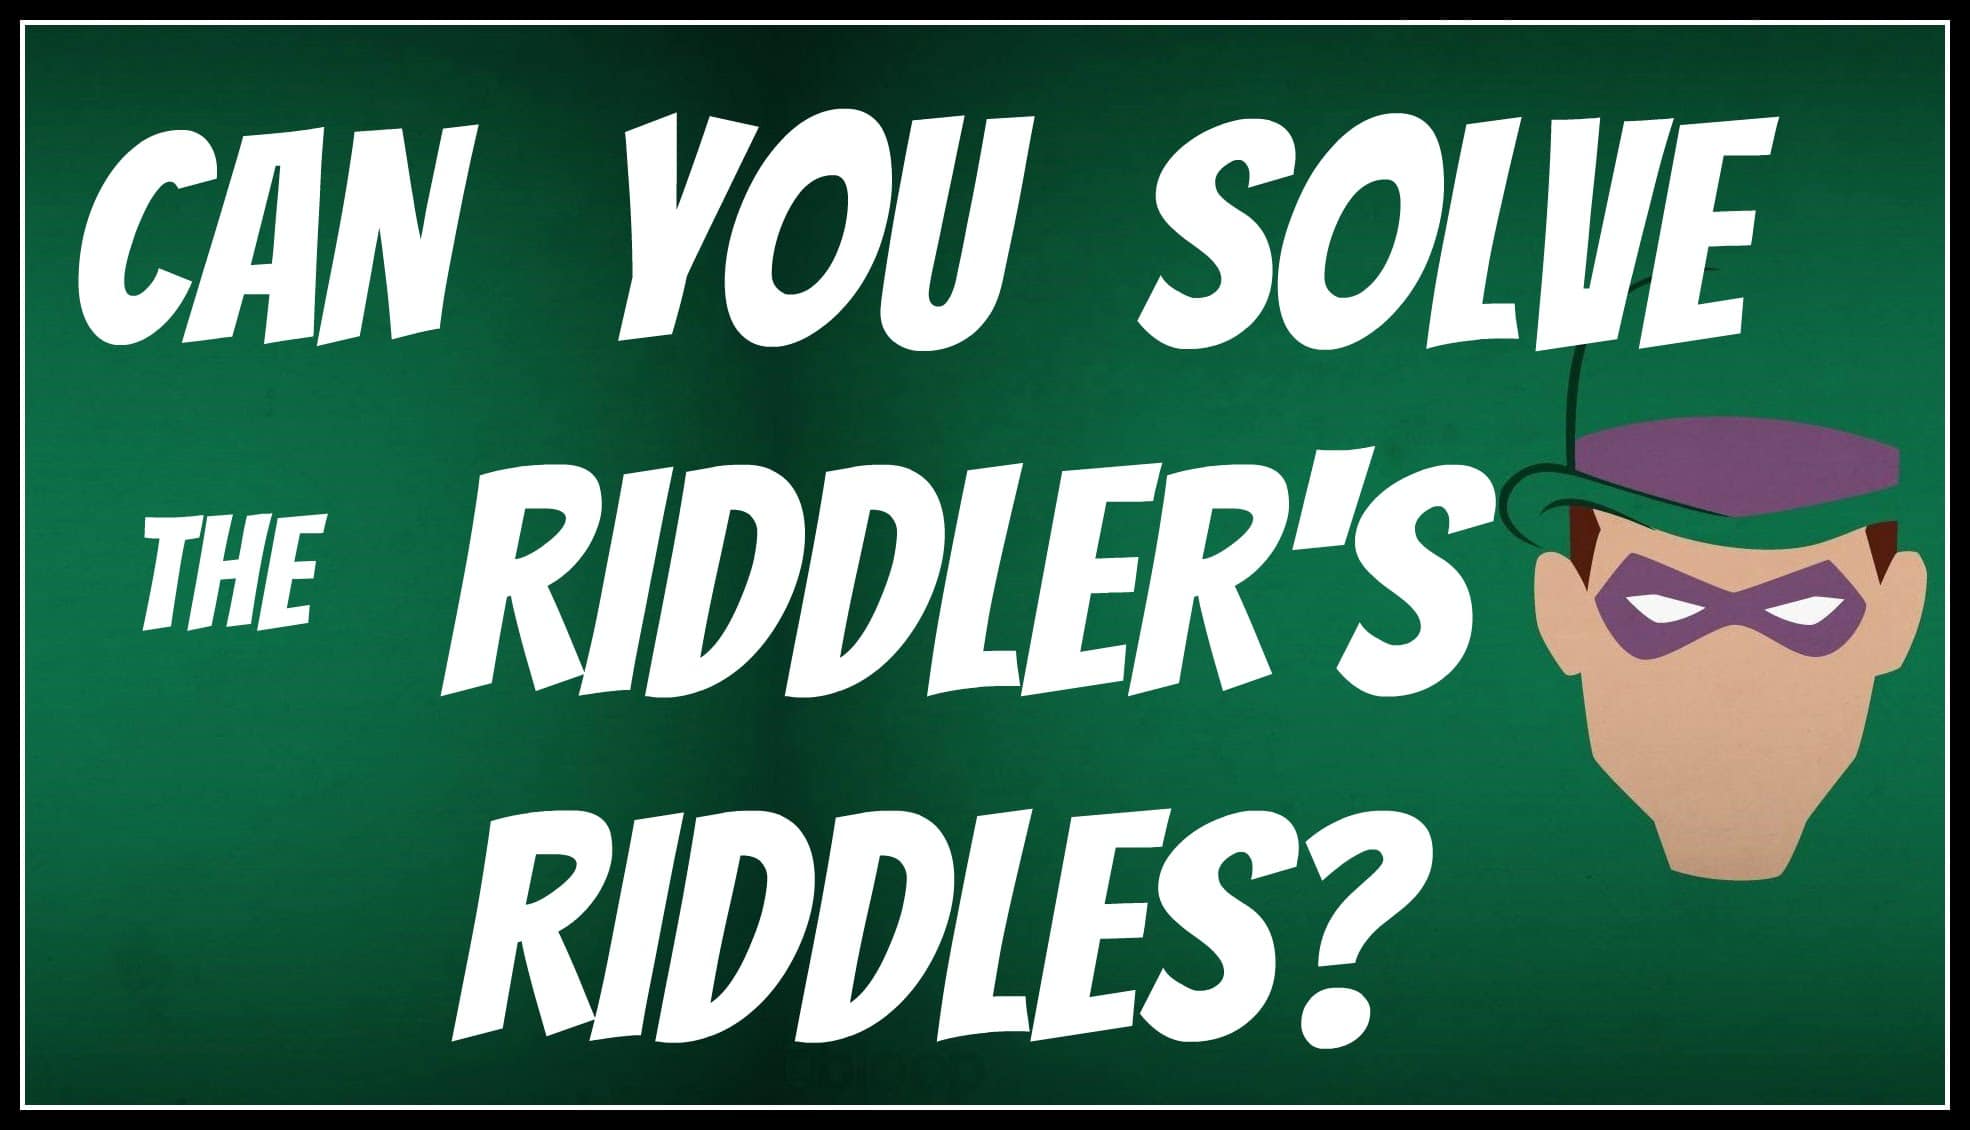 Can you these best Riddler's Riddles